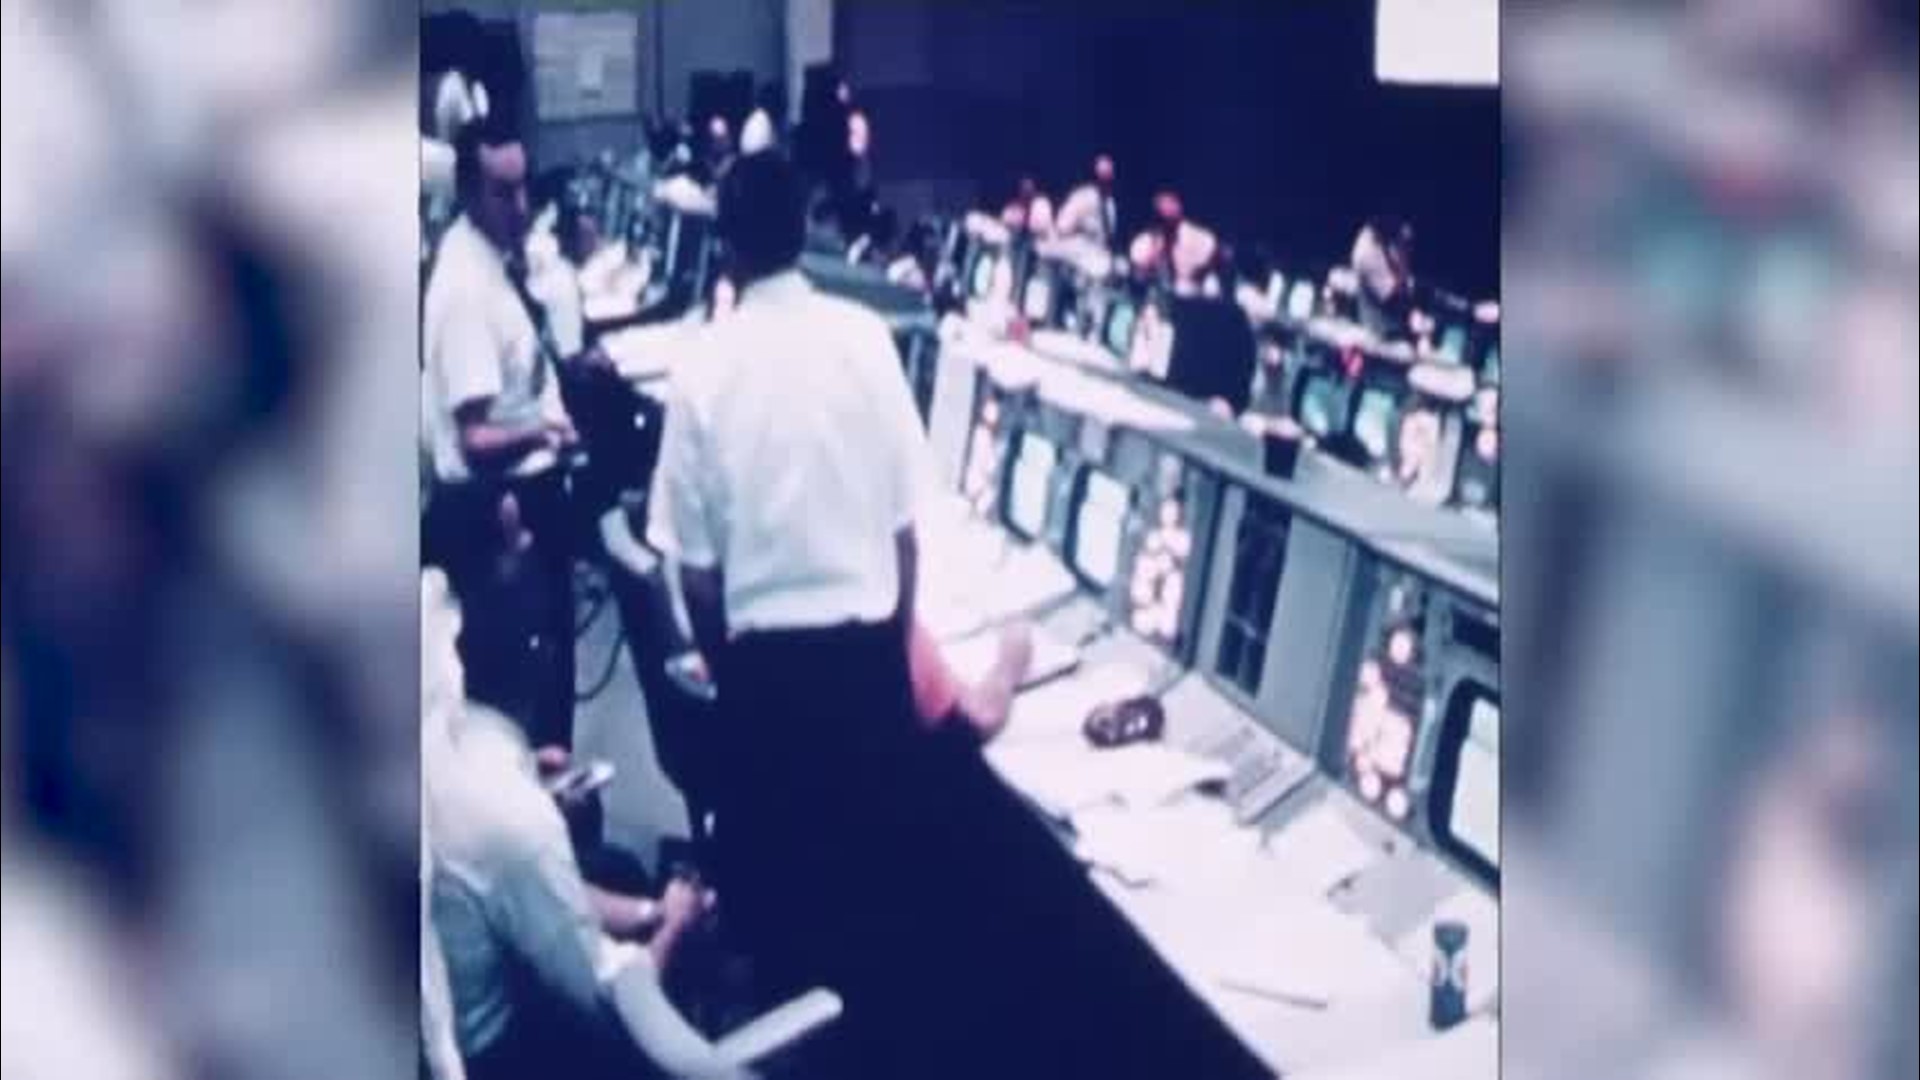 NASA’s old Mission Control in Houston has been meticulously restored to the way it looked 50 years ago when two men first landed on the moon. It was last used for space shuttle flights in the 1990s.